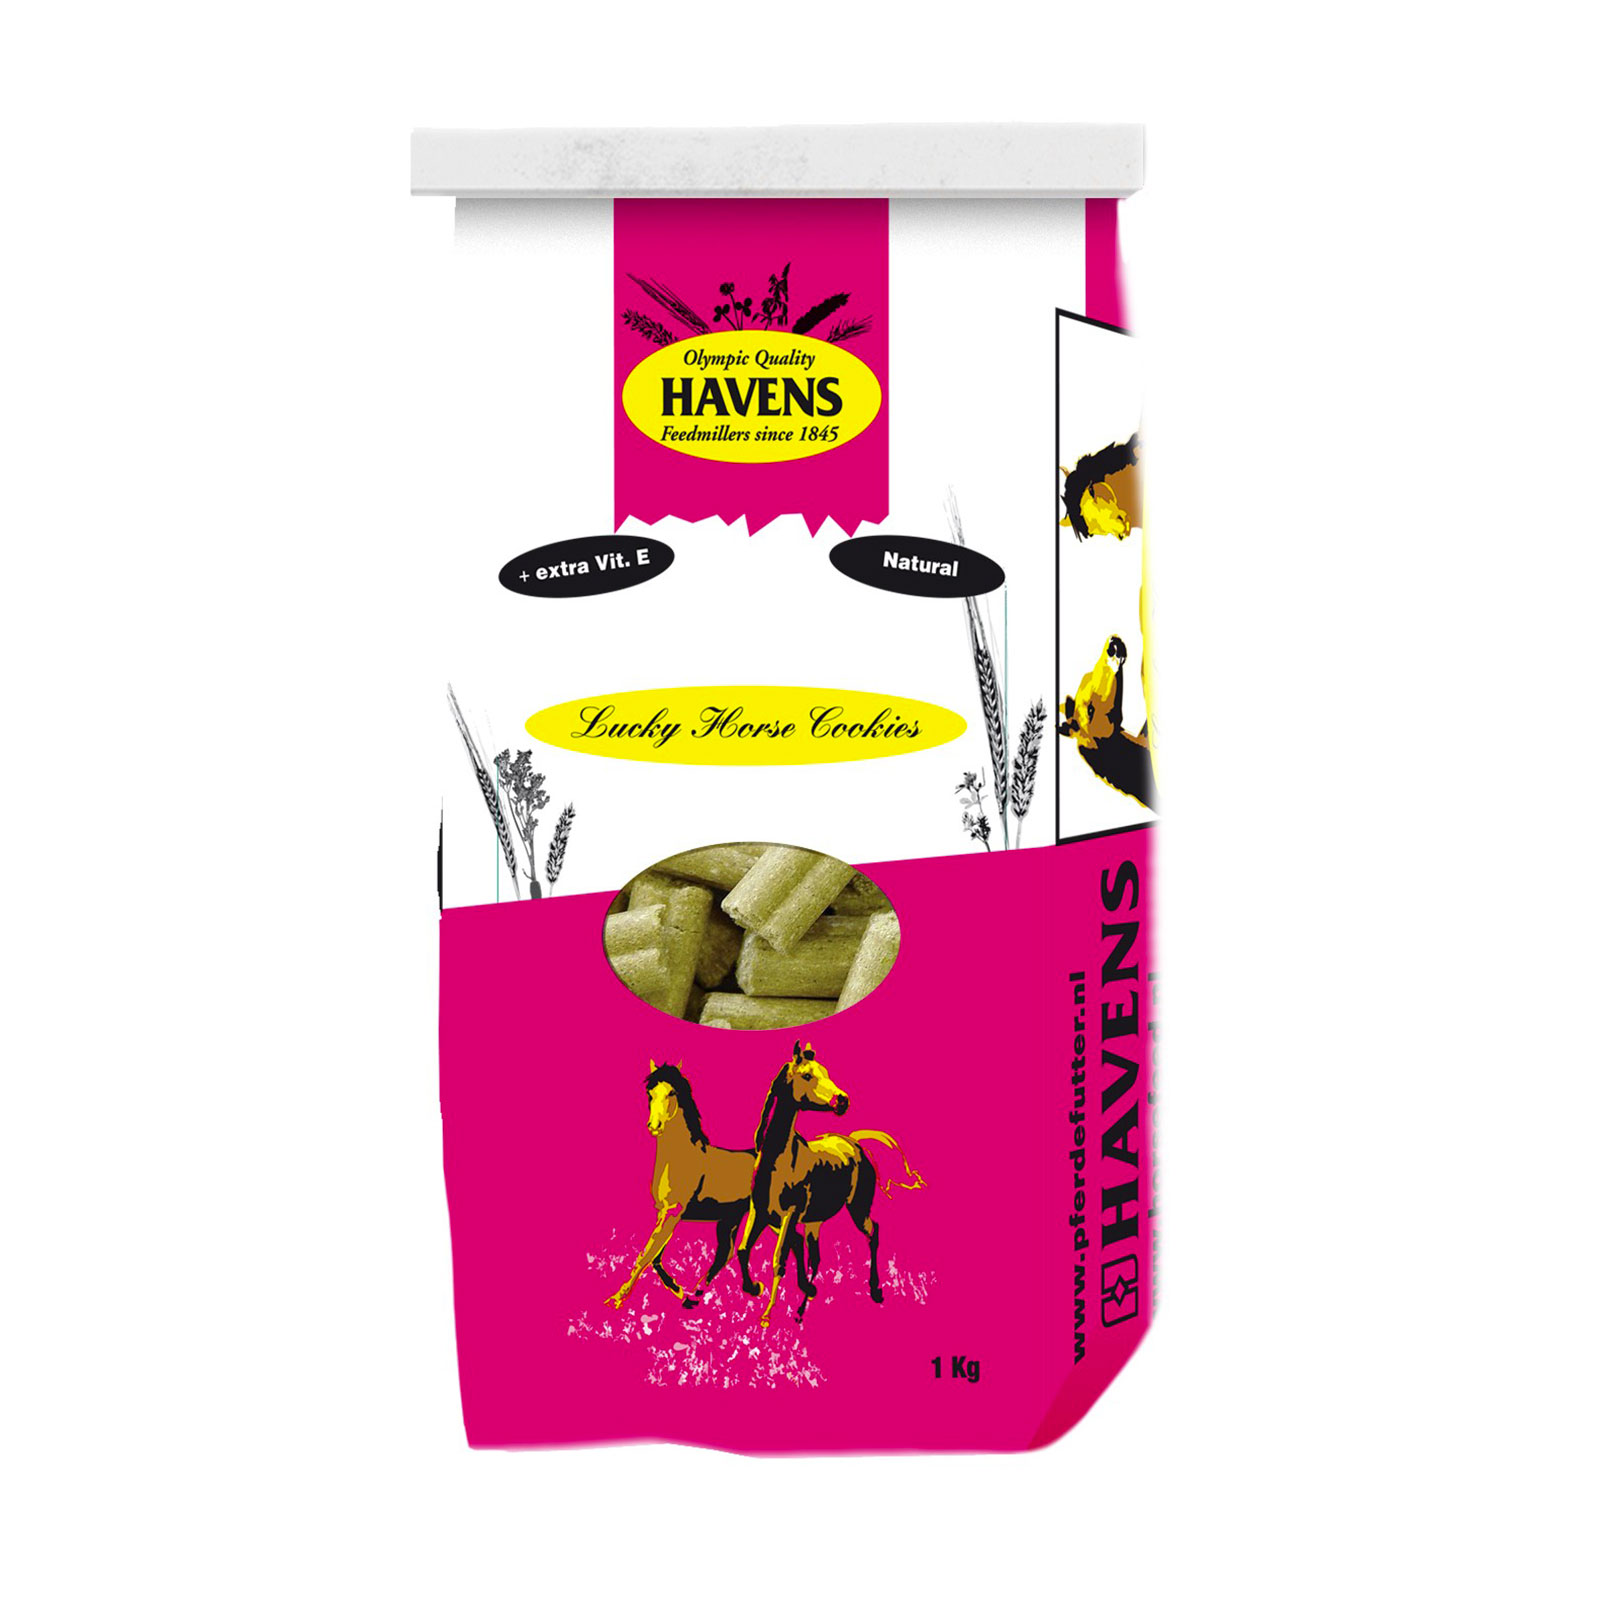 Lucky Horse Cookies 1kg - 